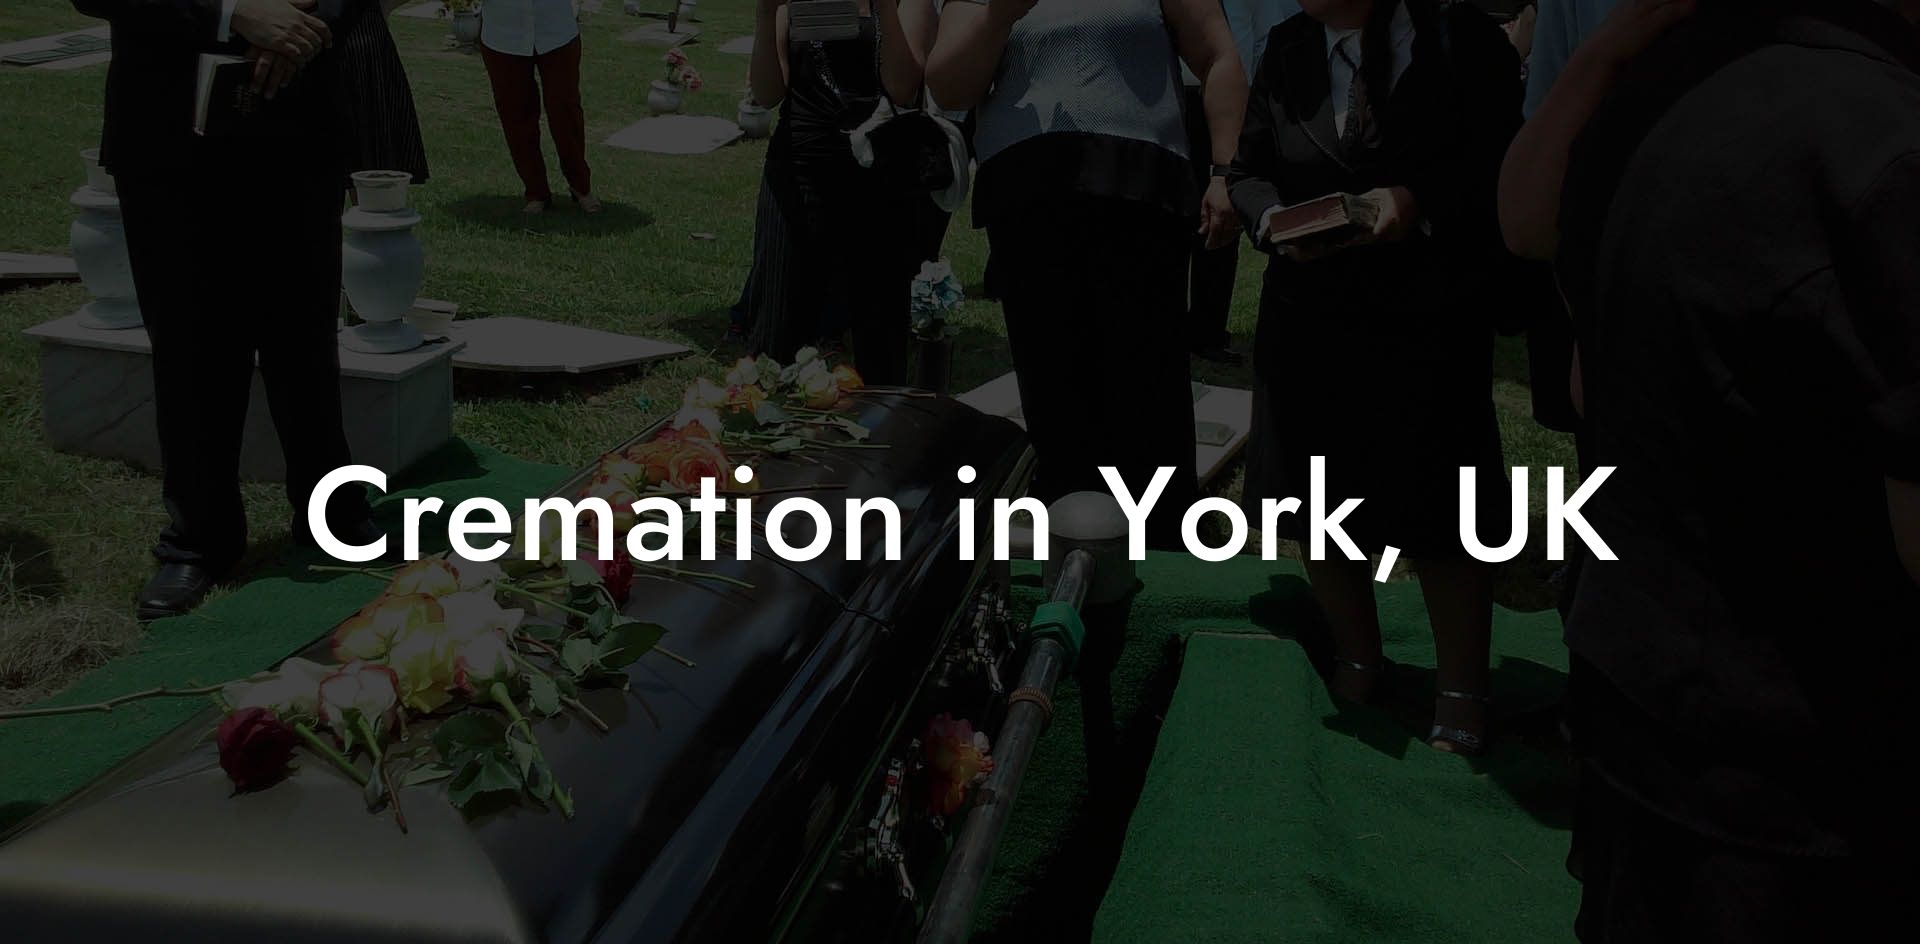 Cremation in York, UK